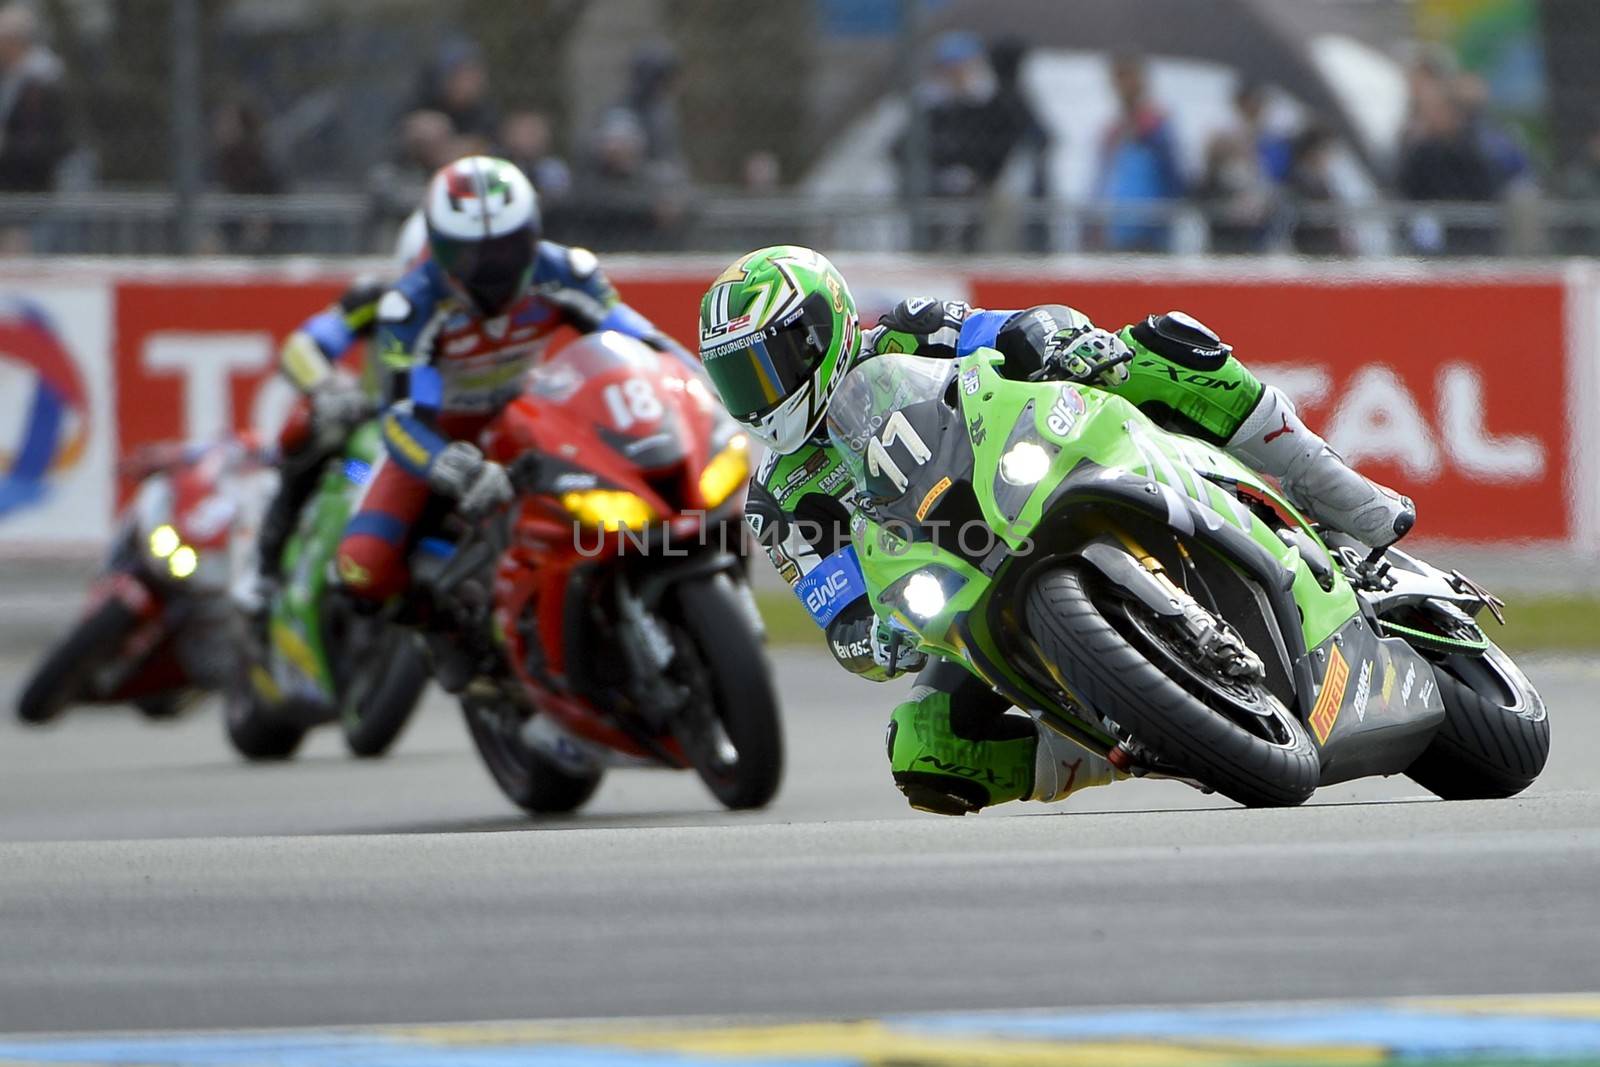 FRANCE, Le Mans: French rider Gregory Leblanc on Kawasaki ZX10R Formula EWC N°11 is pictured during the 39th edition of le Mans 24 hours moto endurance race on April 10, 2014 in Le Mans, western France. French team Leblanc-Lagrive-Foret on Kawasaki N.11 won the race.